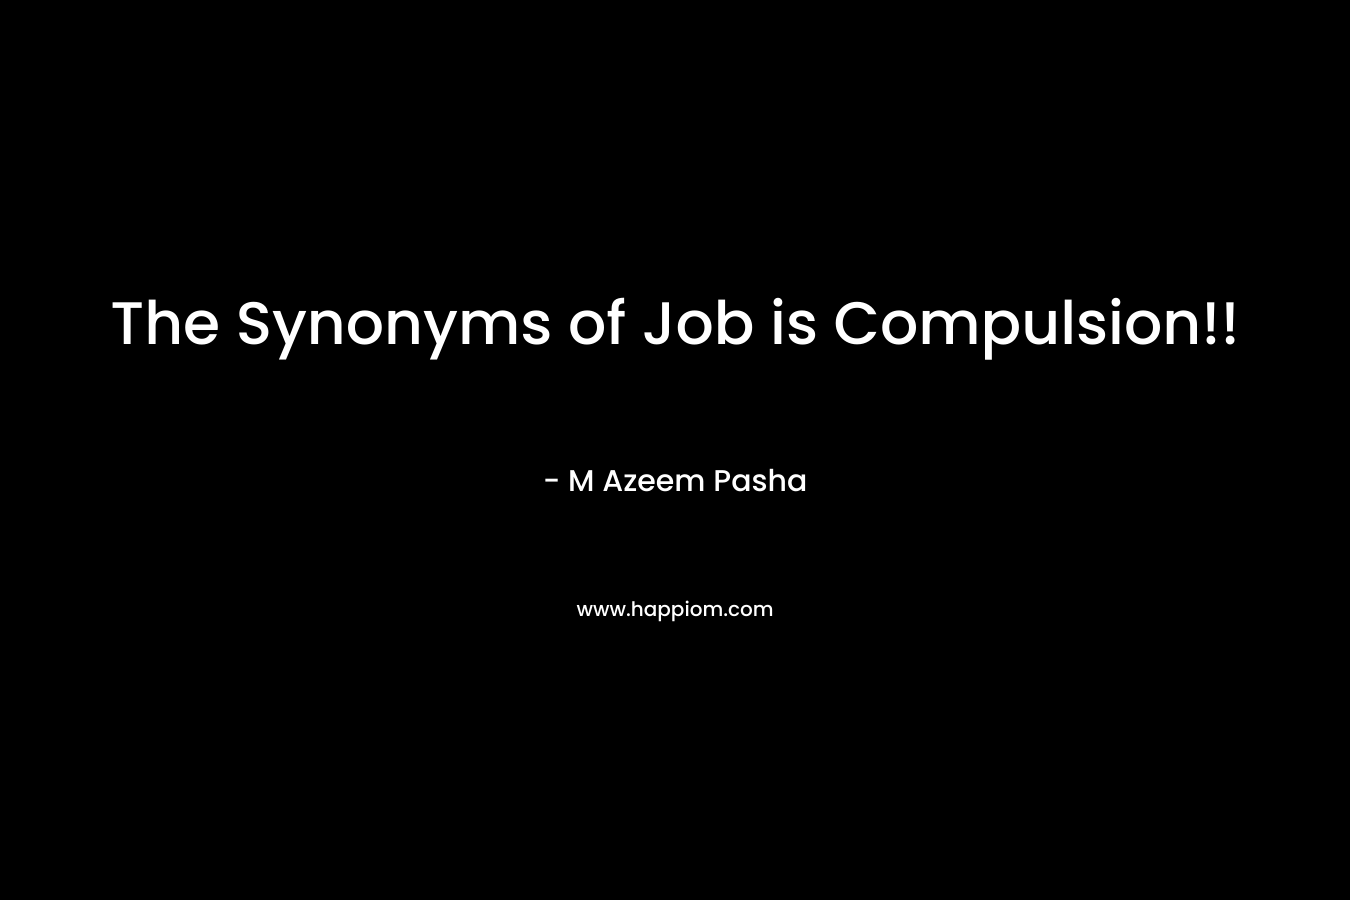 The Synonyms of Job is Compulsion!!